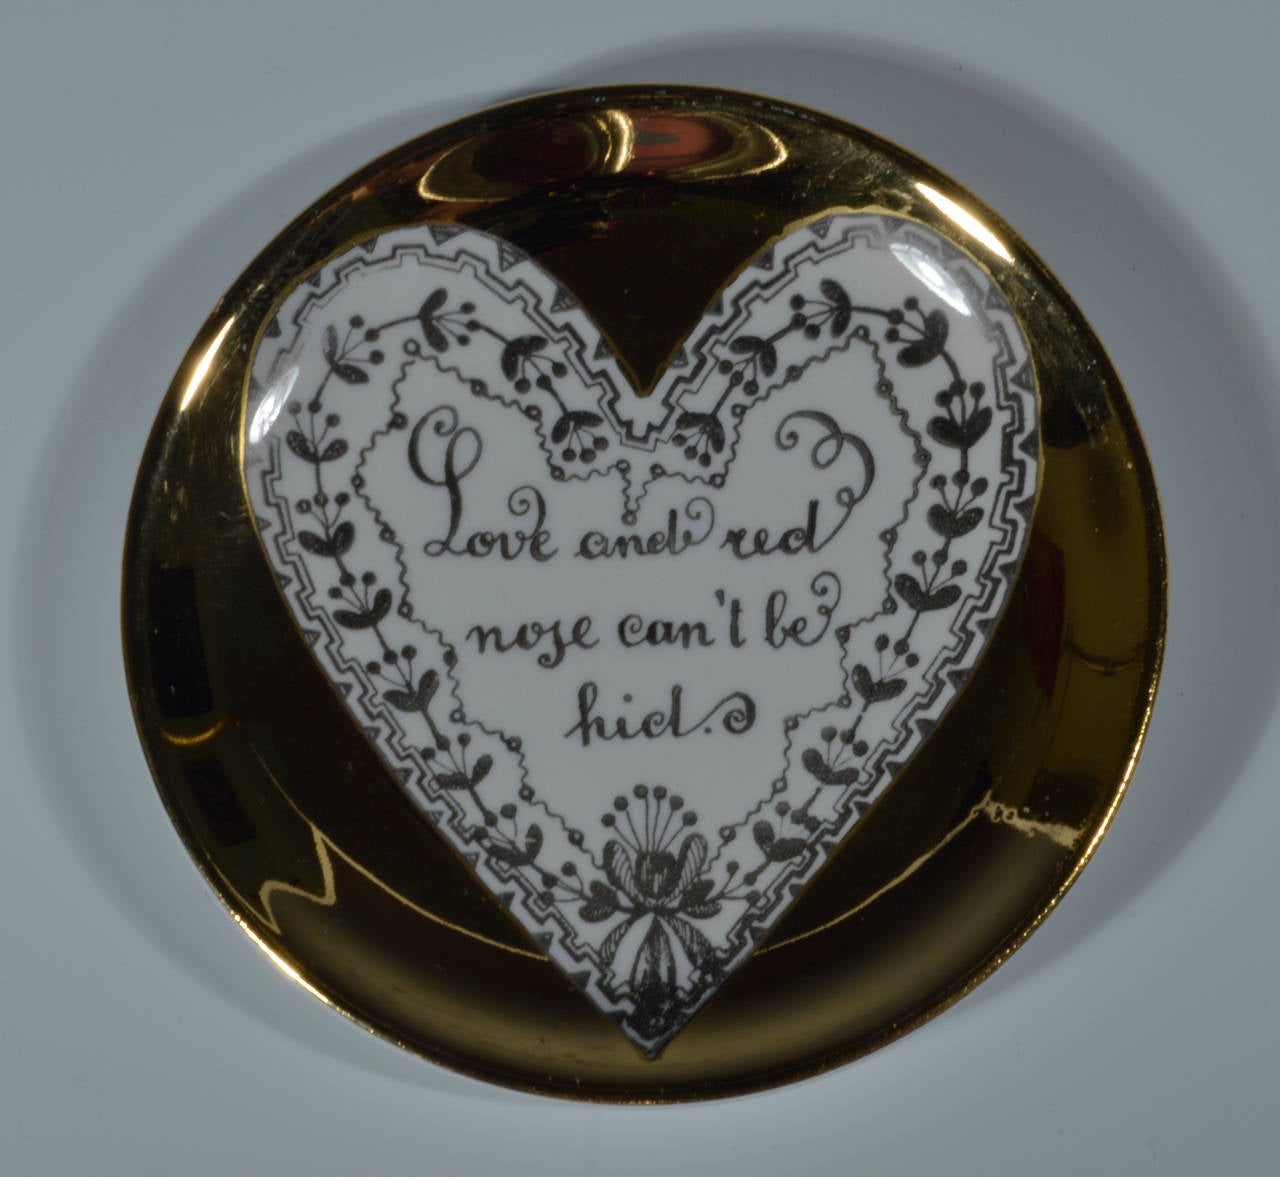 Italian Piero Fornasetti Porcelain Boxed Coaster Set with Love, Hearts and Sayings